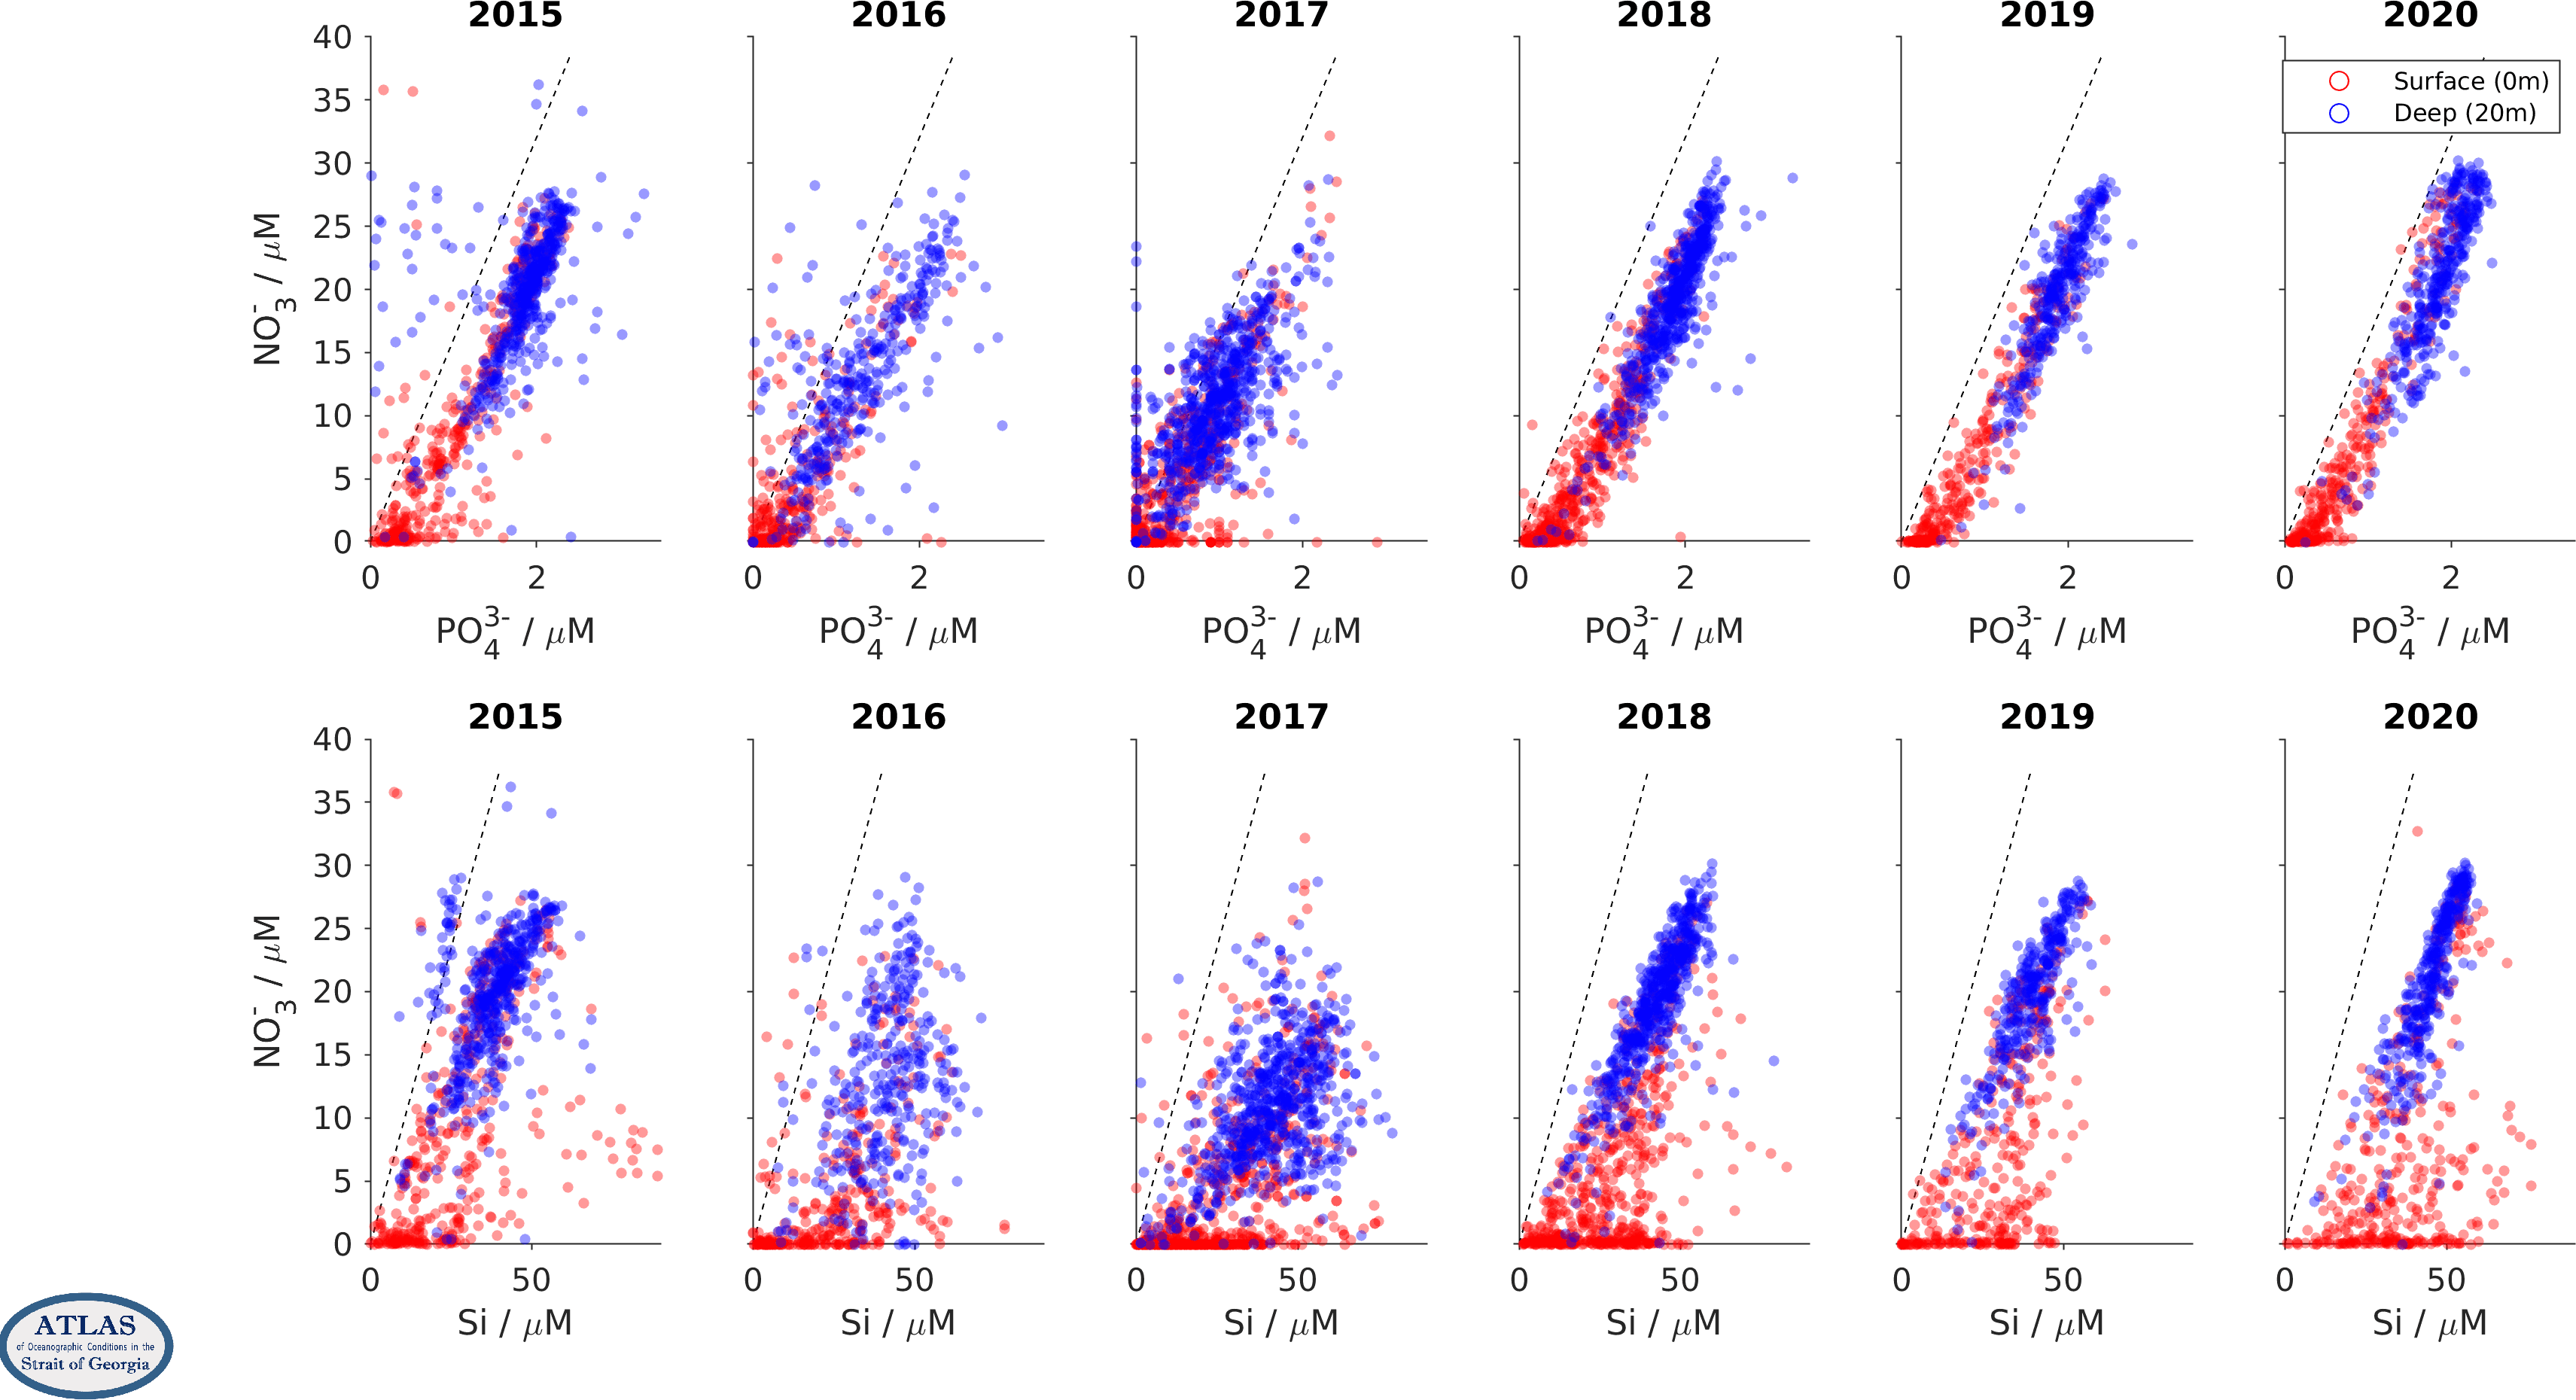 Property/Property correlations for CitSci nutrient data by year.